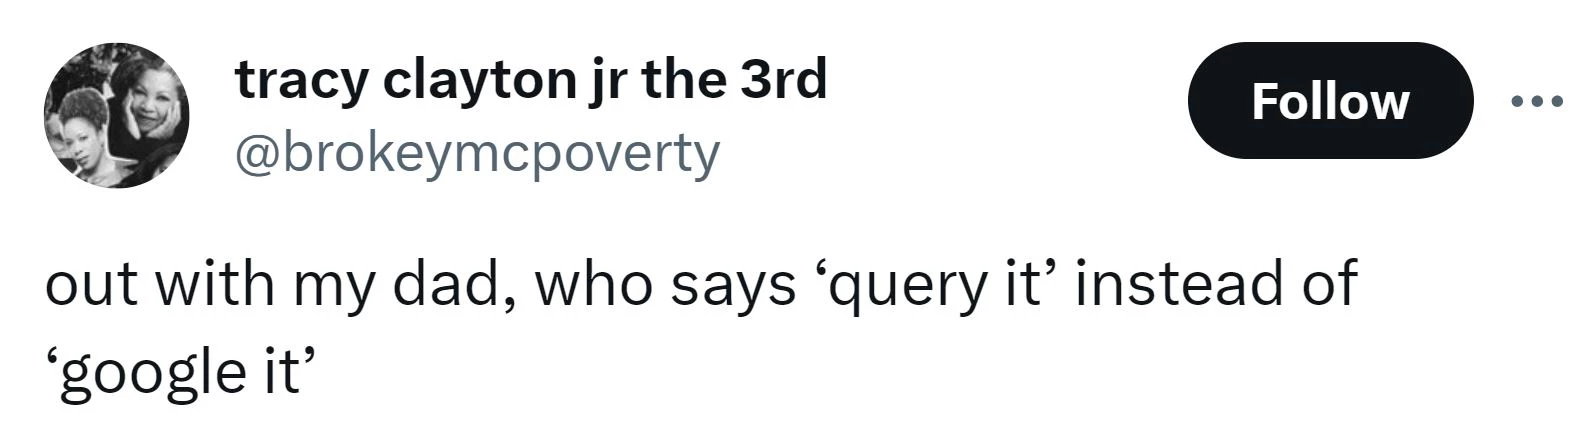 Querry It